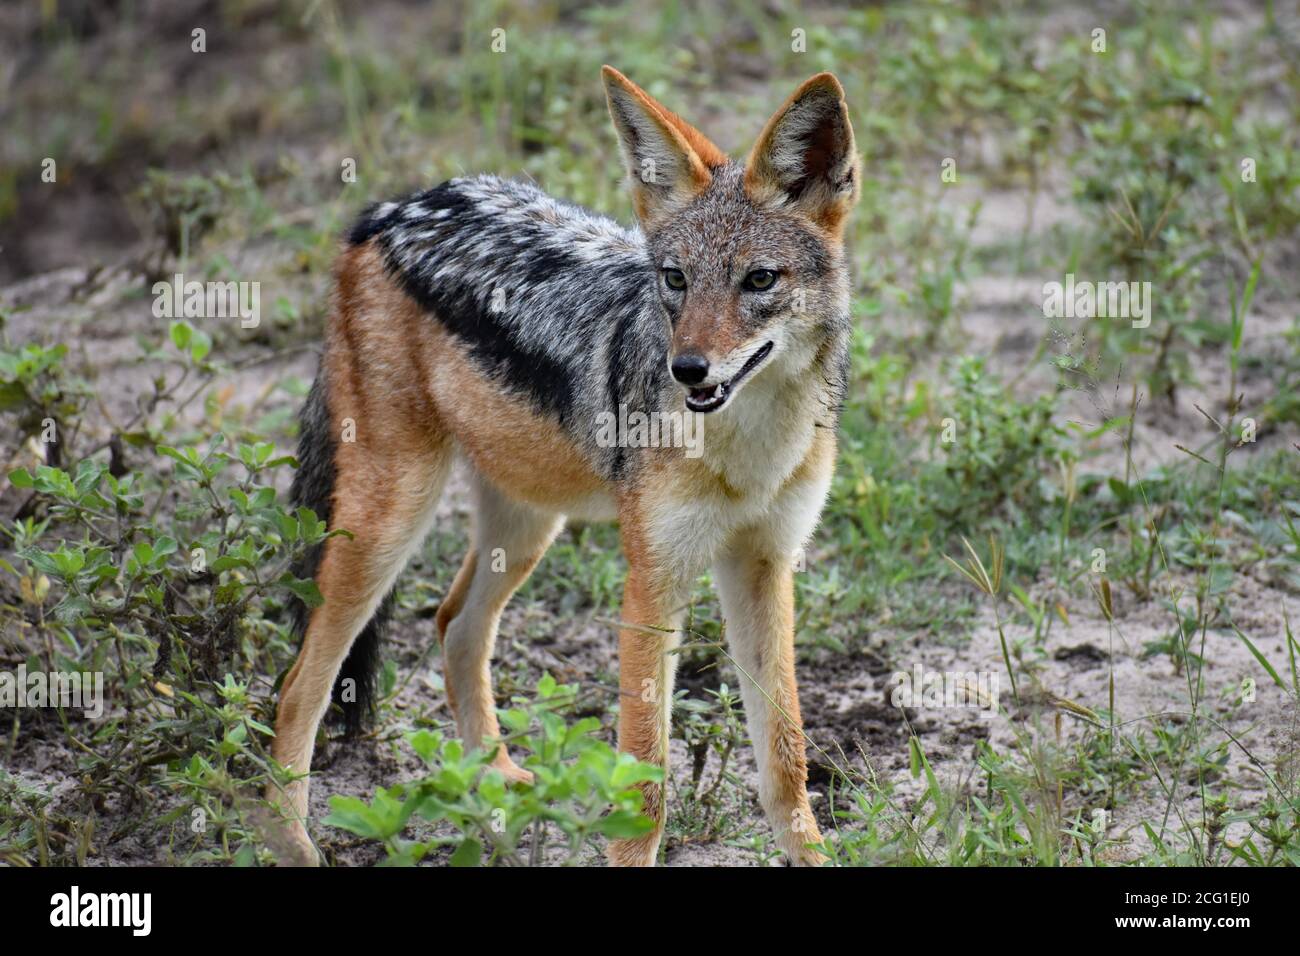 A Black-Backed Jackal (Canis mesomelas or Lupulella mesomelas) seen during a game drive whilst on safari in Chobe National Park, Botswana, Africa. Stock Photo